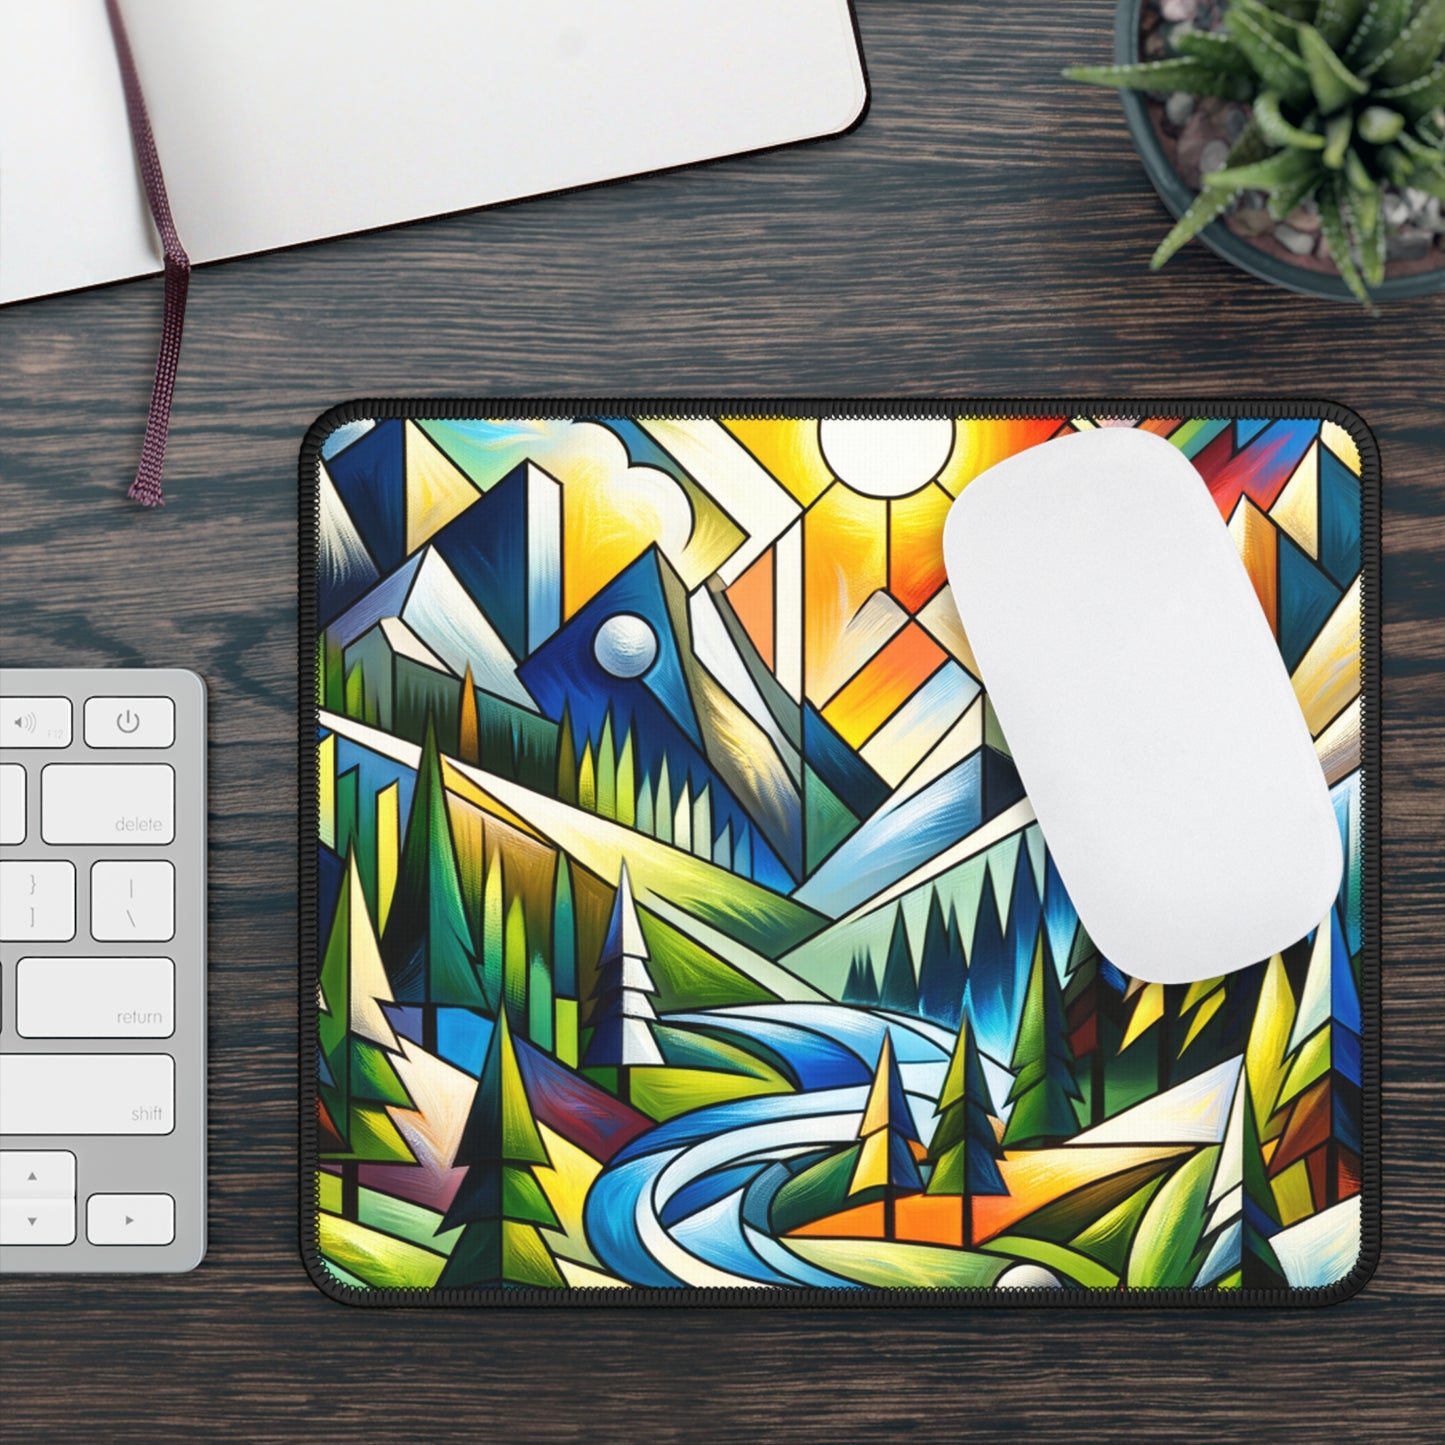 "Cubic Naturalism" - The Alien Gaming Mouse Pad Cubism Style